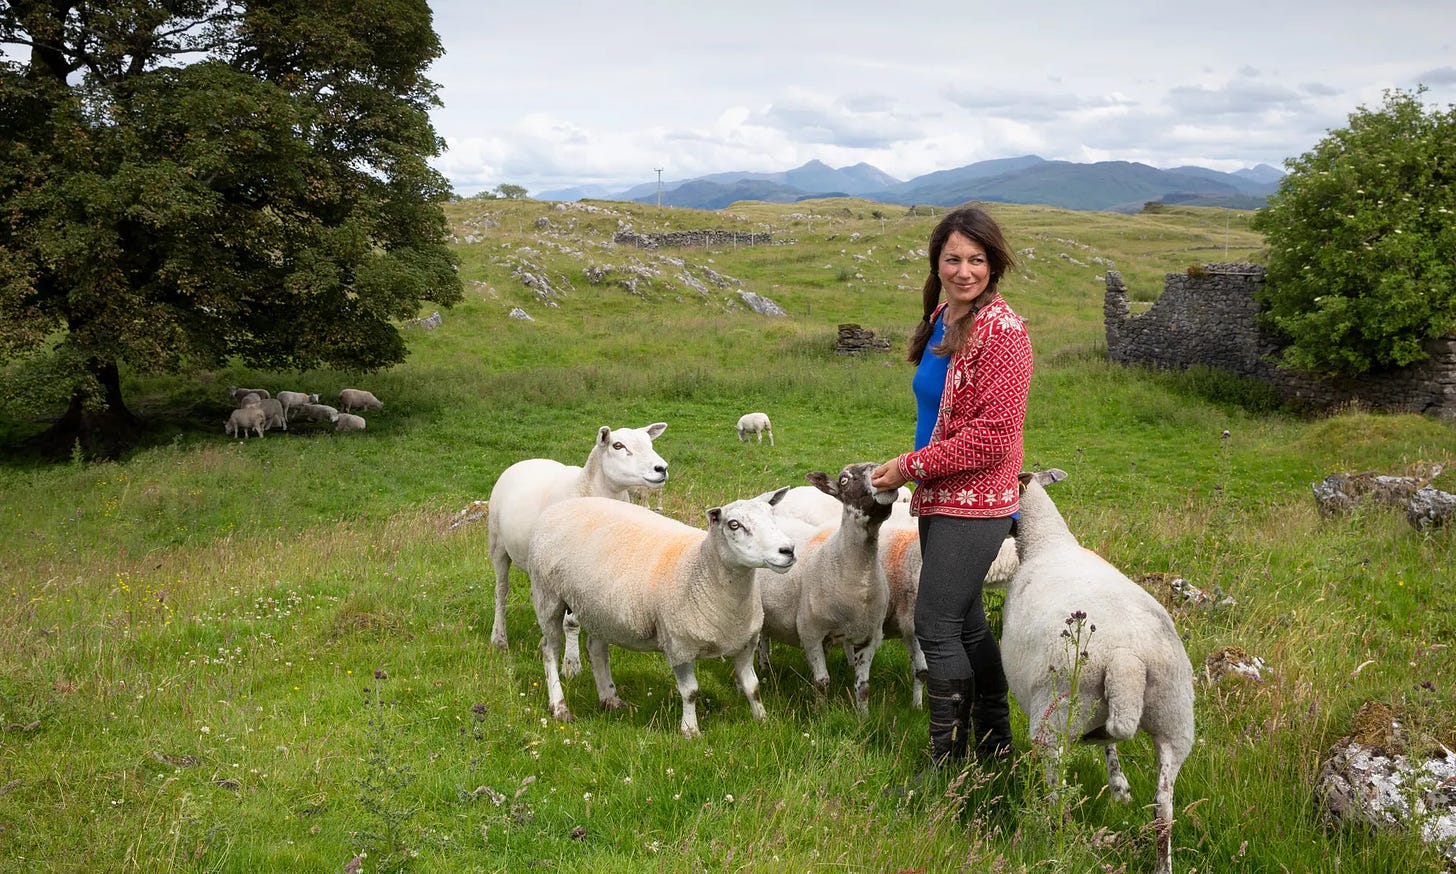 Tamsin Calidas standing in a green field with a few sheep around her, ruinous buildings and mountains in the background.